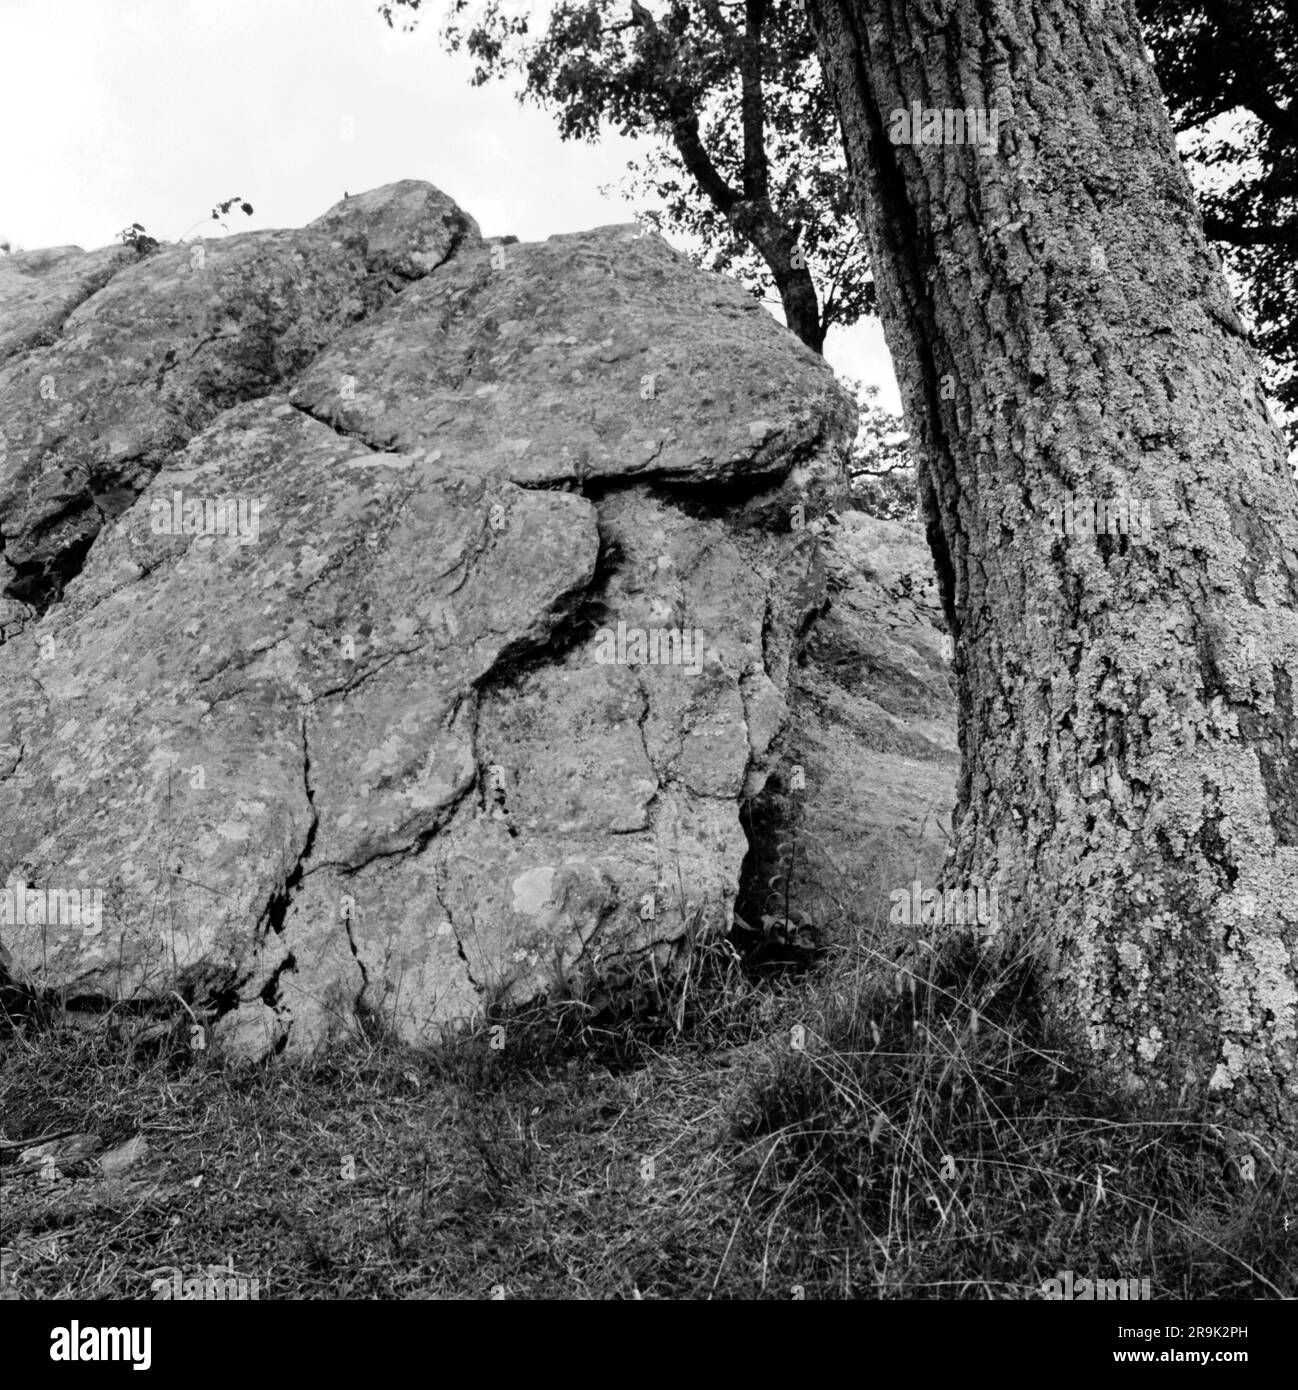 Shenandoah National Park  boulder, tree trunk with lichen, and grass, summer, monochrome Stock Photo